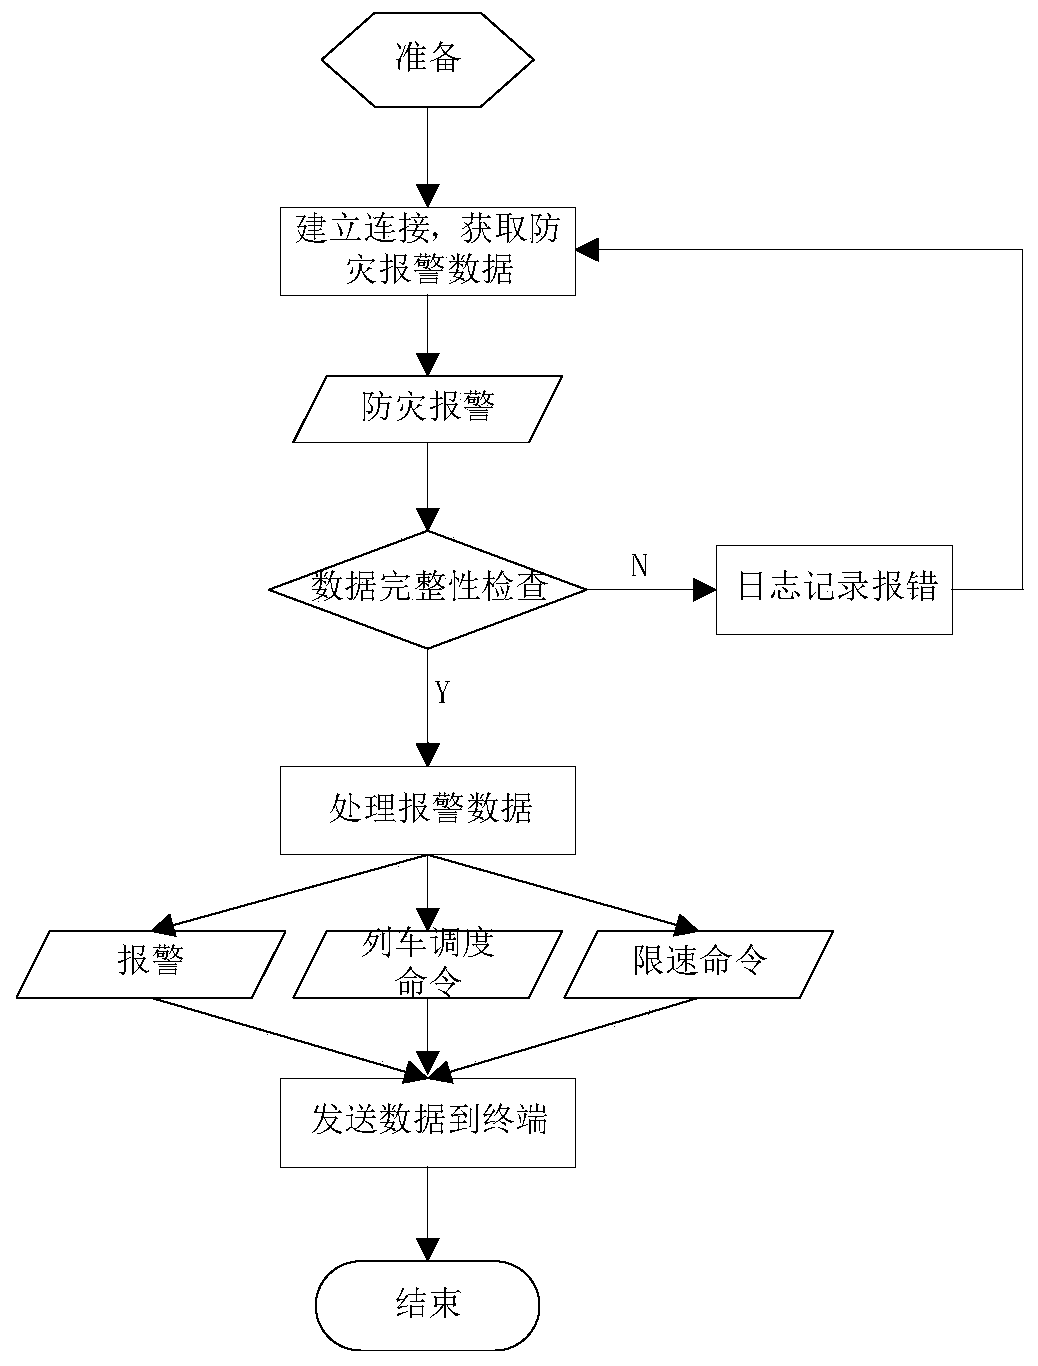 Method for automatically obtaining and processing disaster-prevention warning information through high-speed railway CTC system